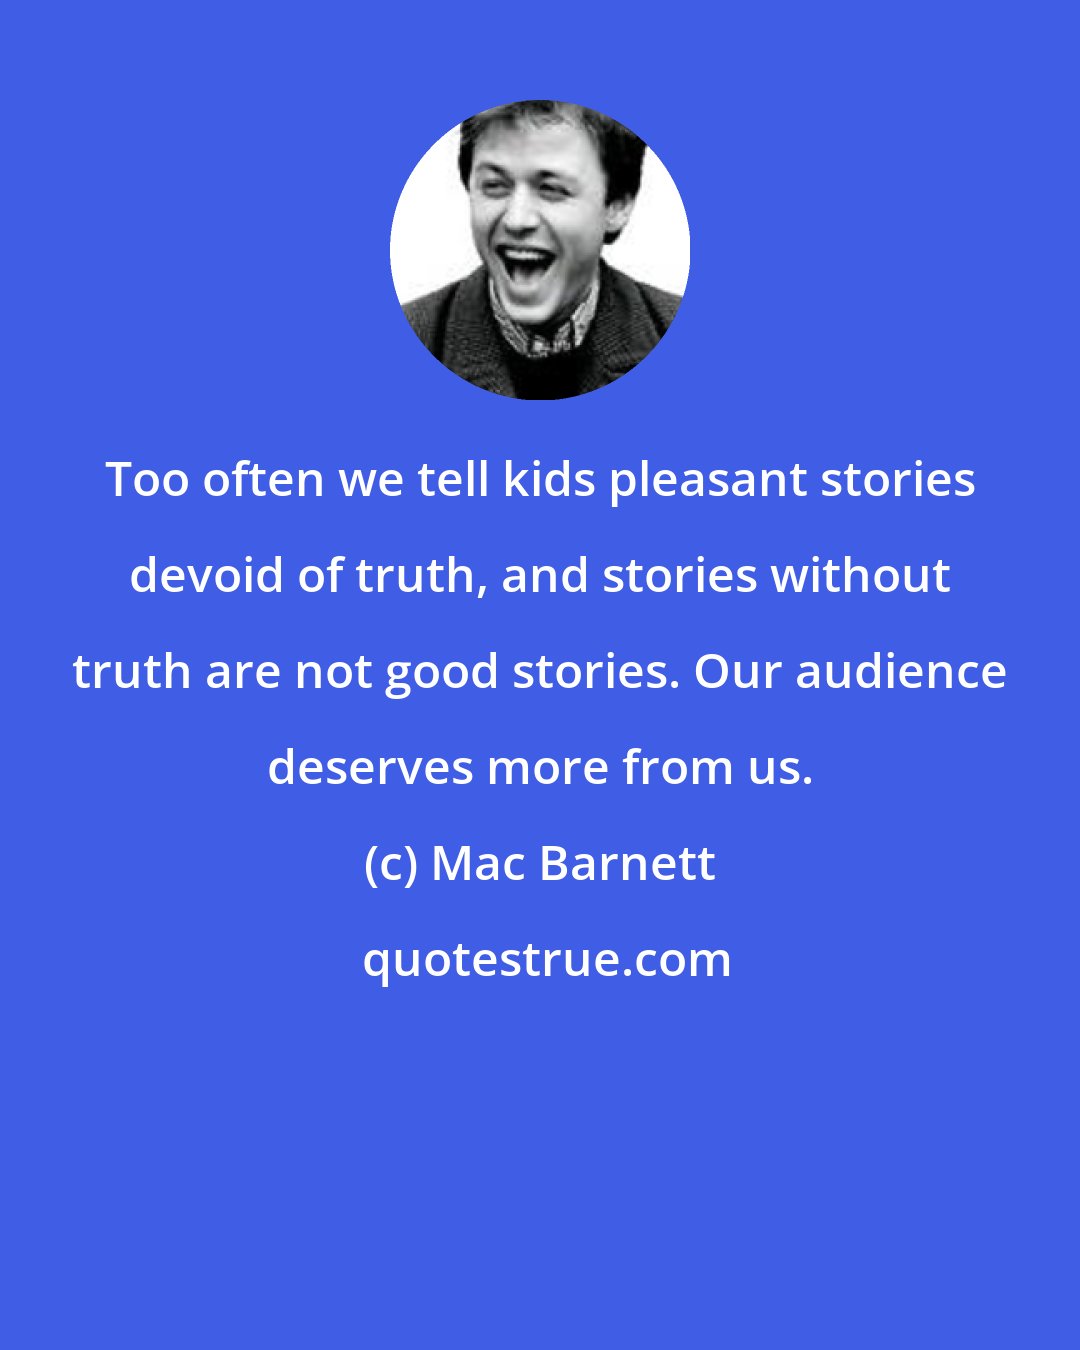 Mac Barnett: Too often we tell kids pleasant stories devoid of truth, and stories without truth are not good stories. Our audience deserves more from us.